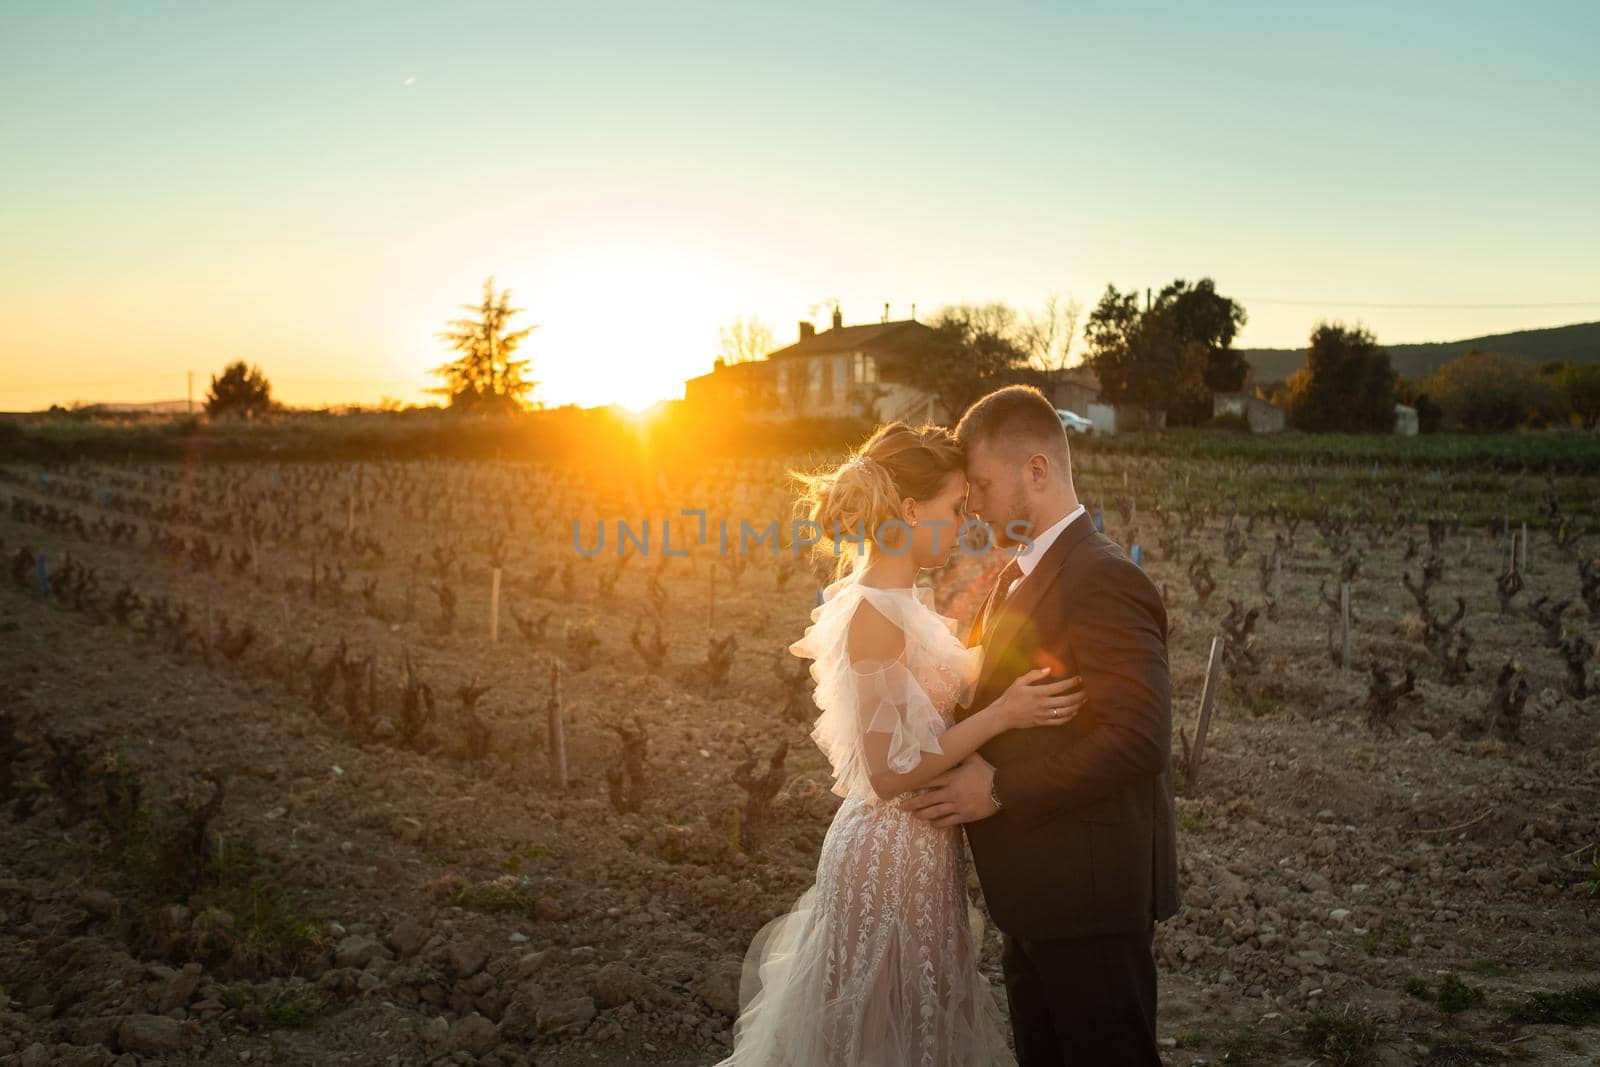 Wedding couple at sunset in France.Wedding in Provence.Wedding photo shoot in France by Lobachad